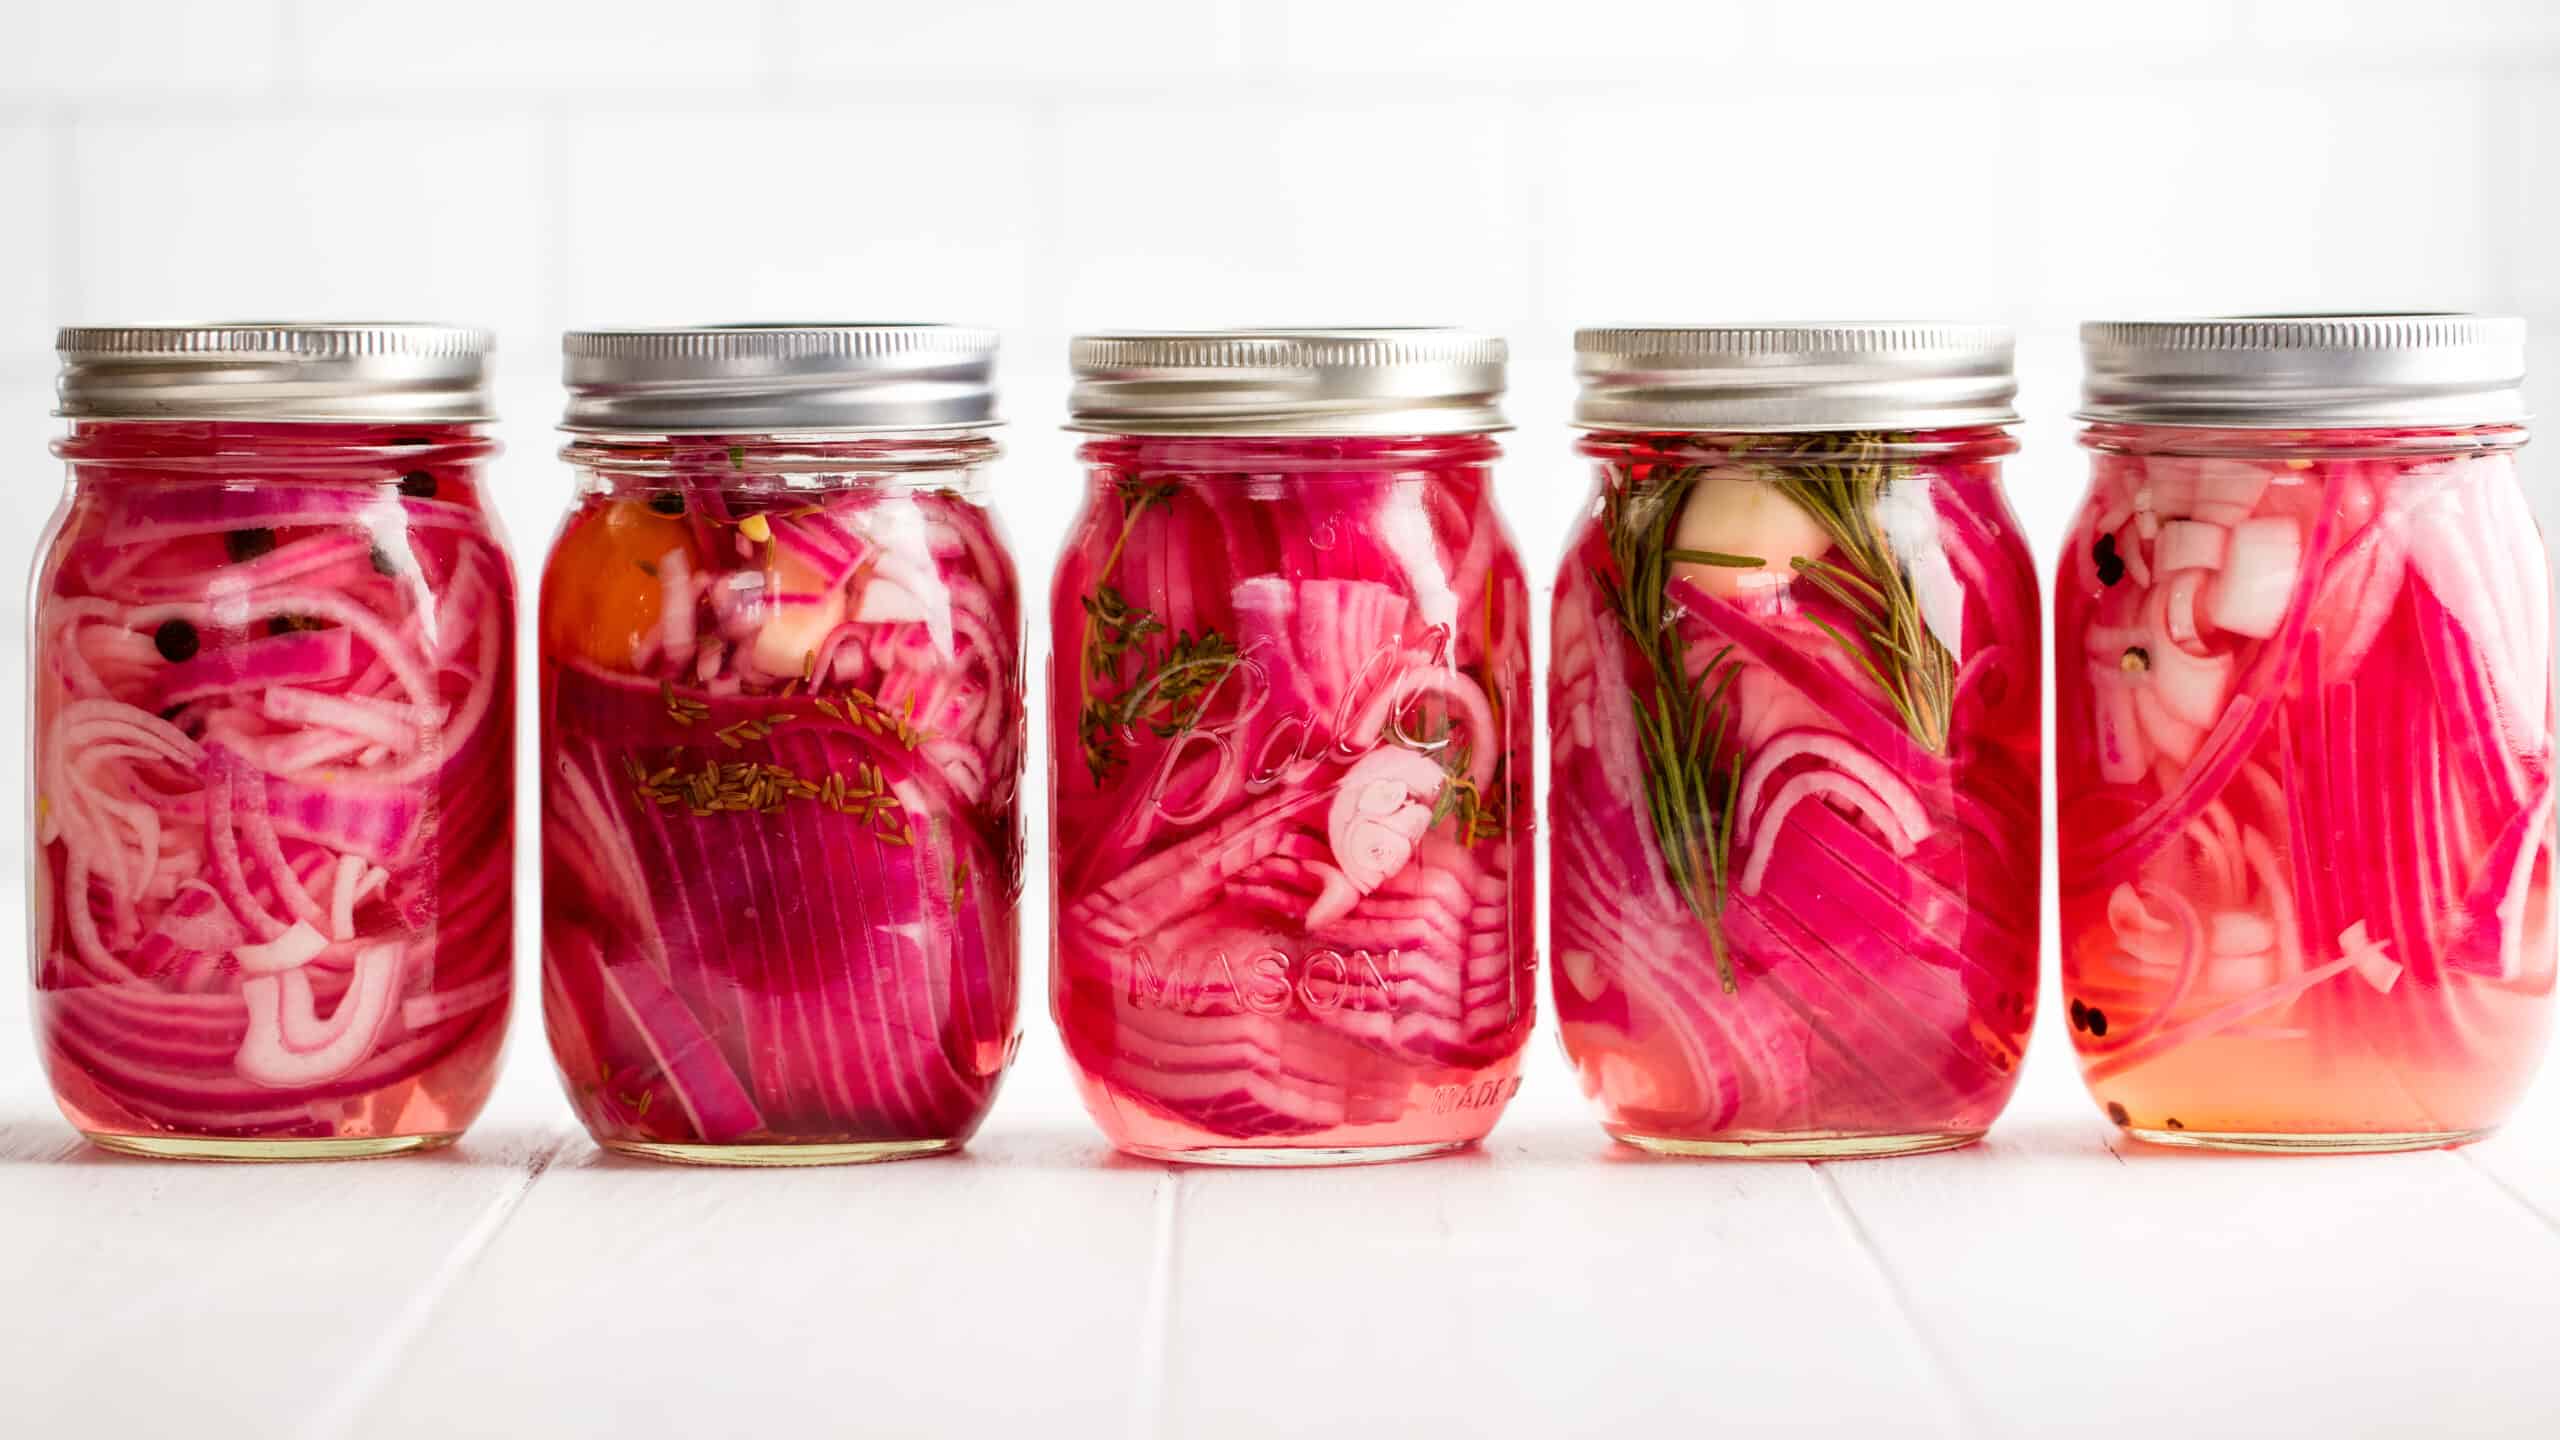 https://thestayathomechef.com/wp-content/uploads/2020/04/Pickled-Red-Onions-2-1-scaled.jpg